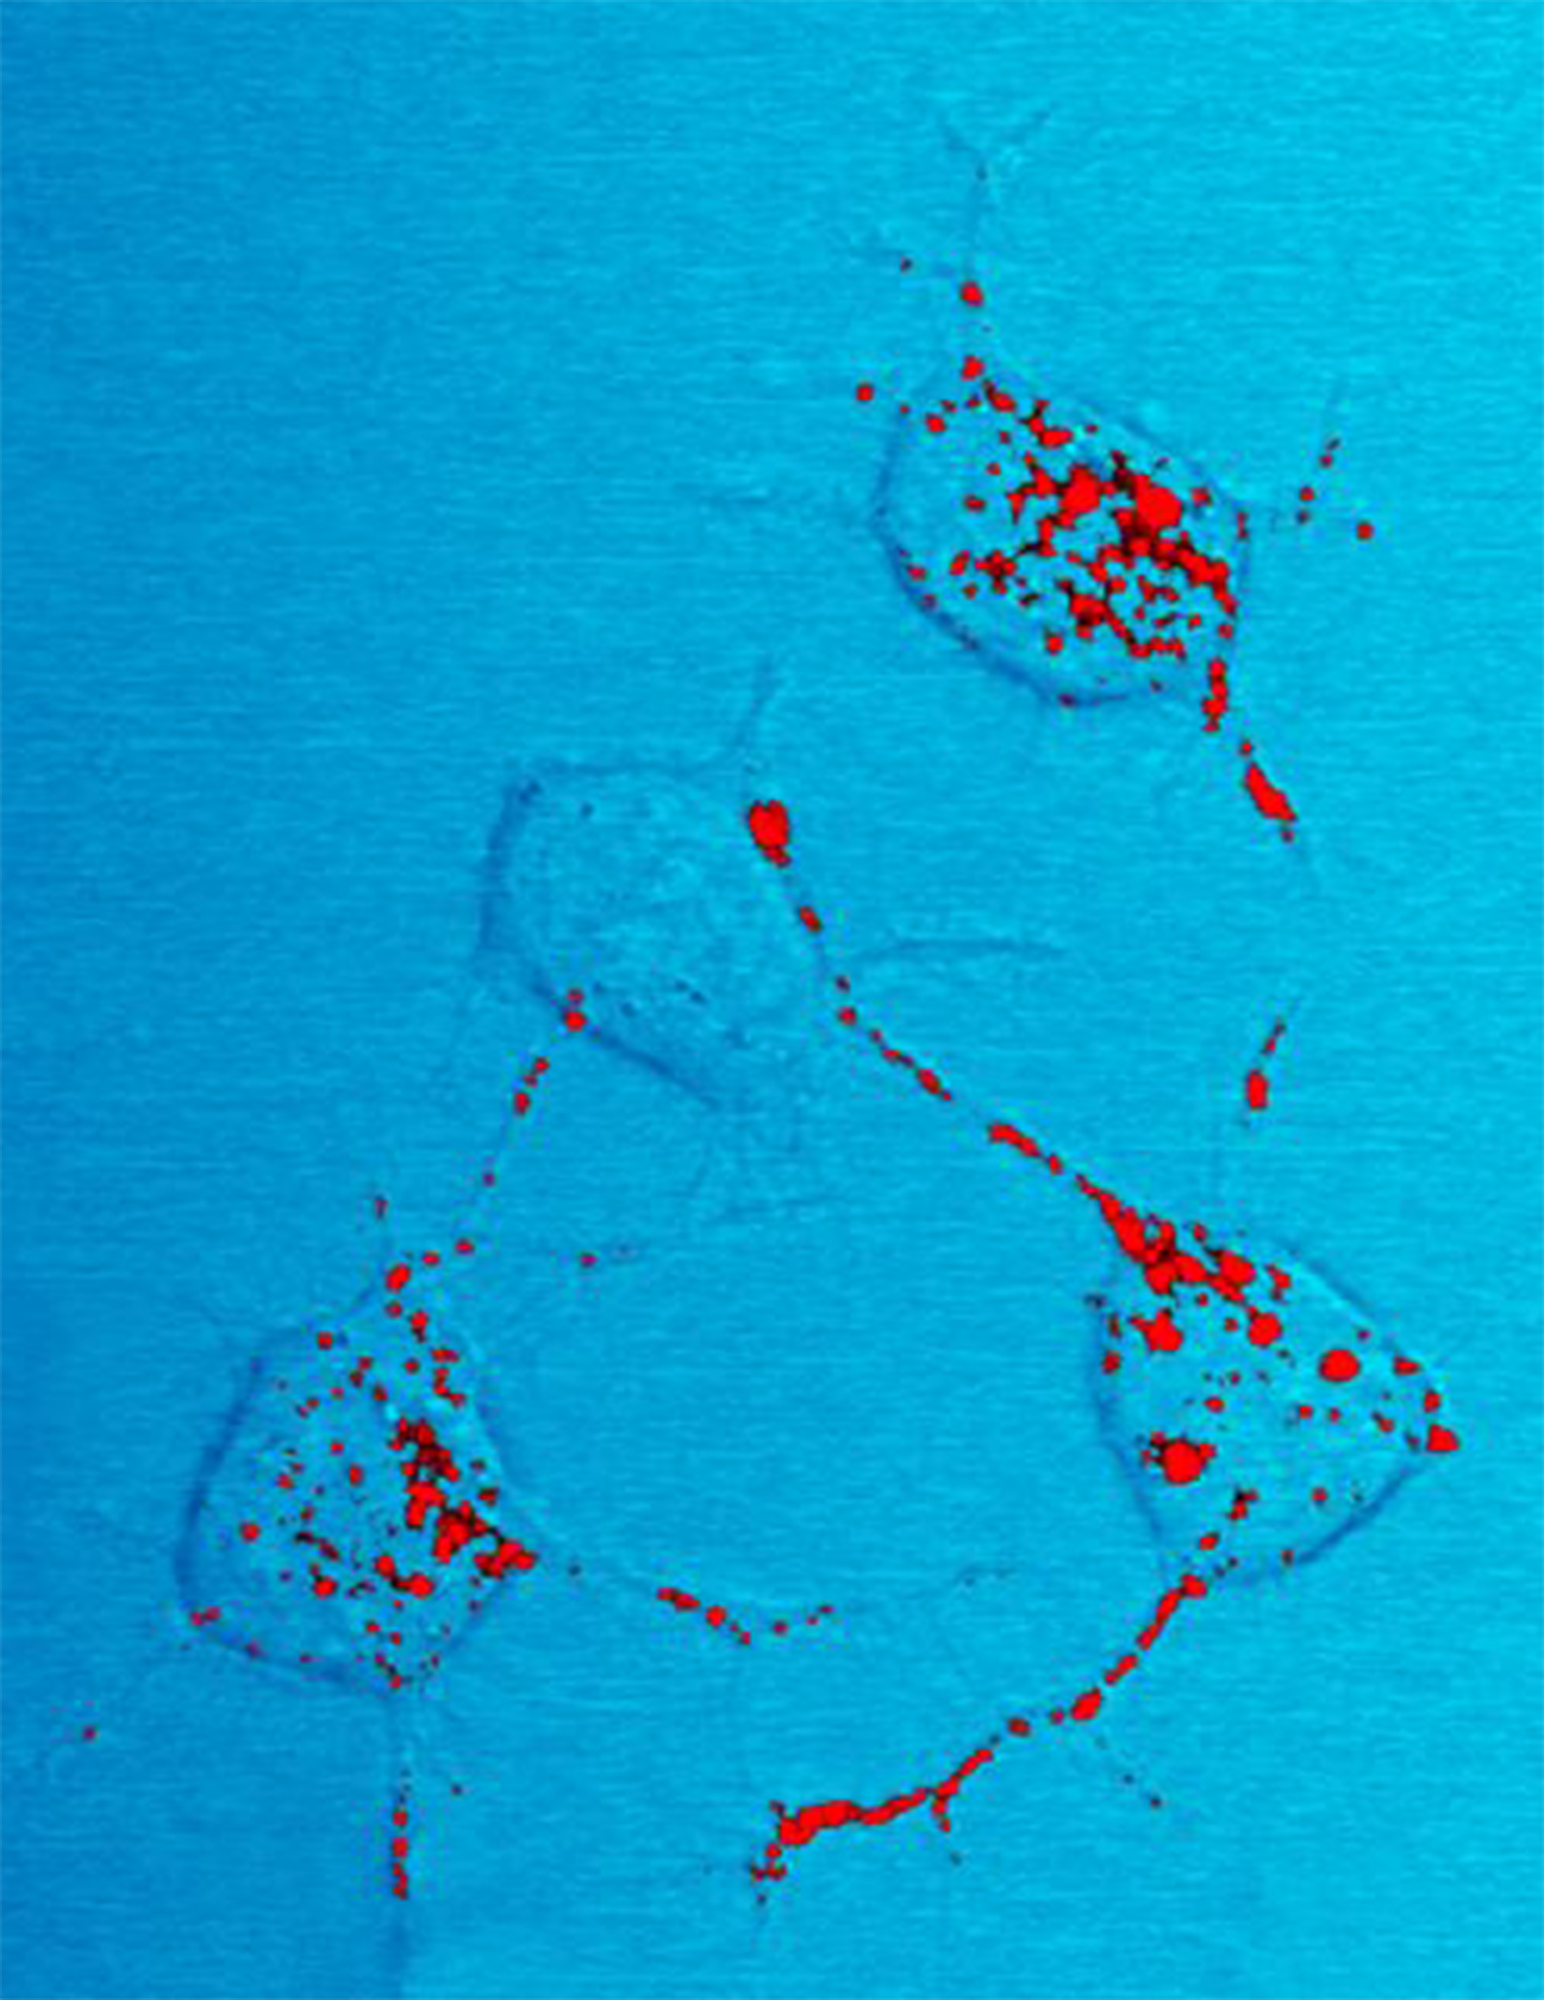 Prion protein, shown in red.